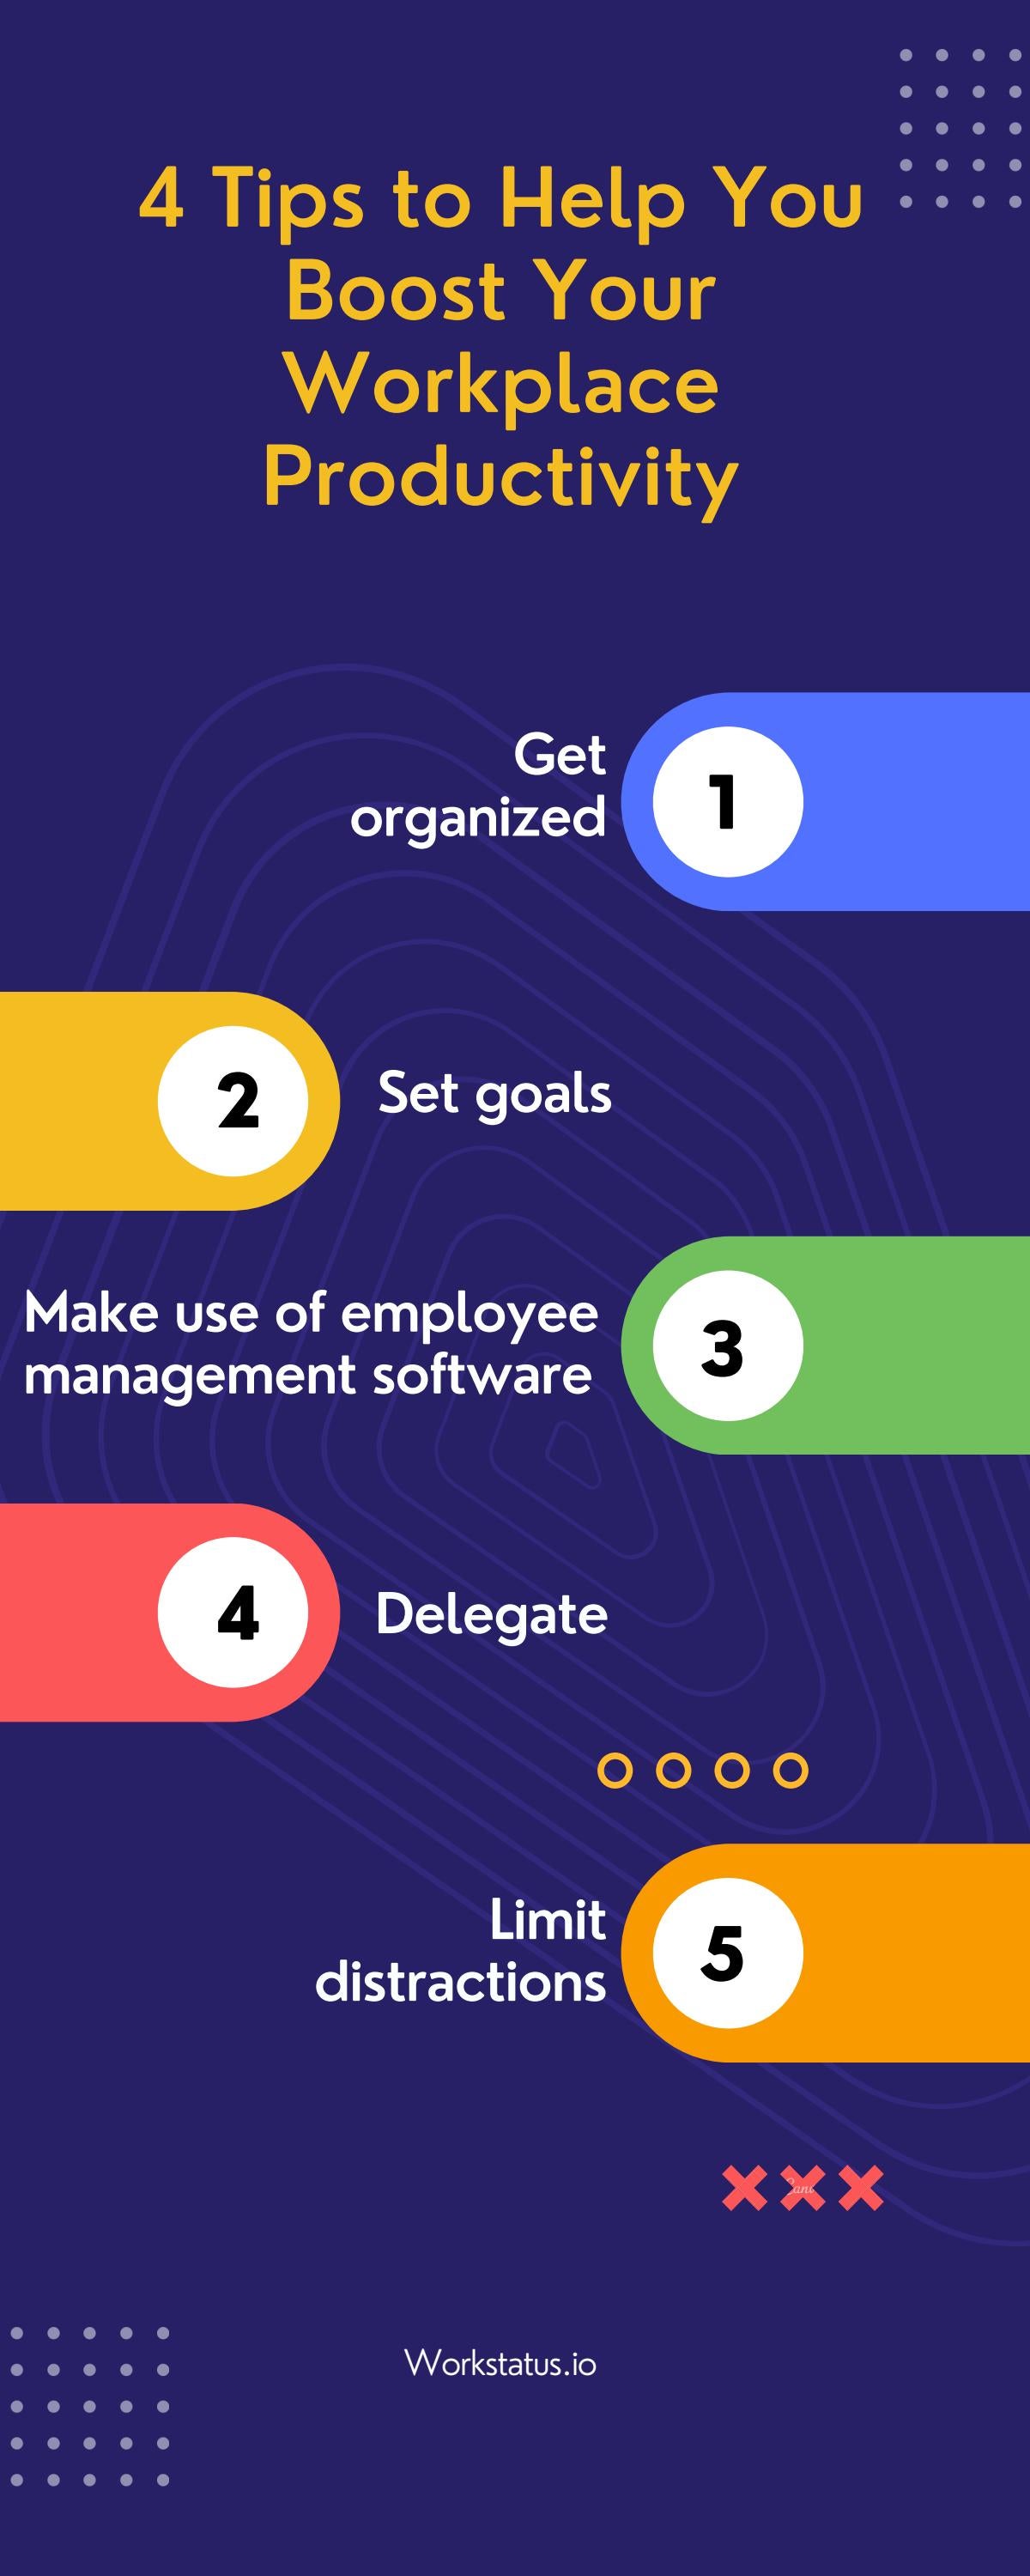 4 Tips to Help You -:--
Boost Your
Workplace
Productivity

Get
organized

Make use of employee
management software

0000

Limit
distractions

XXX

 

 

 

 

EEE
coo 0 0 Workstatus.io